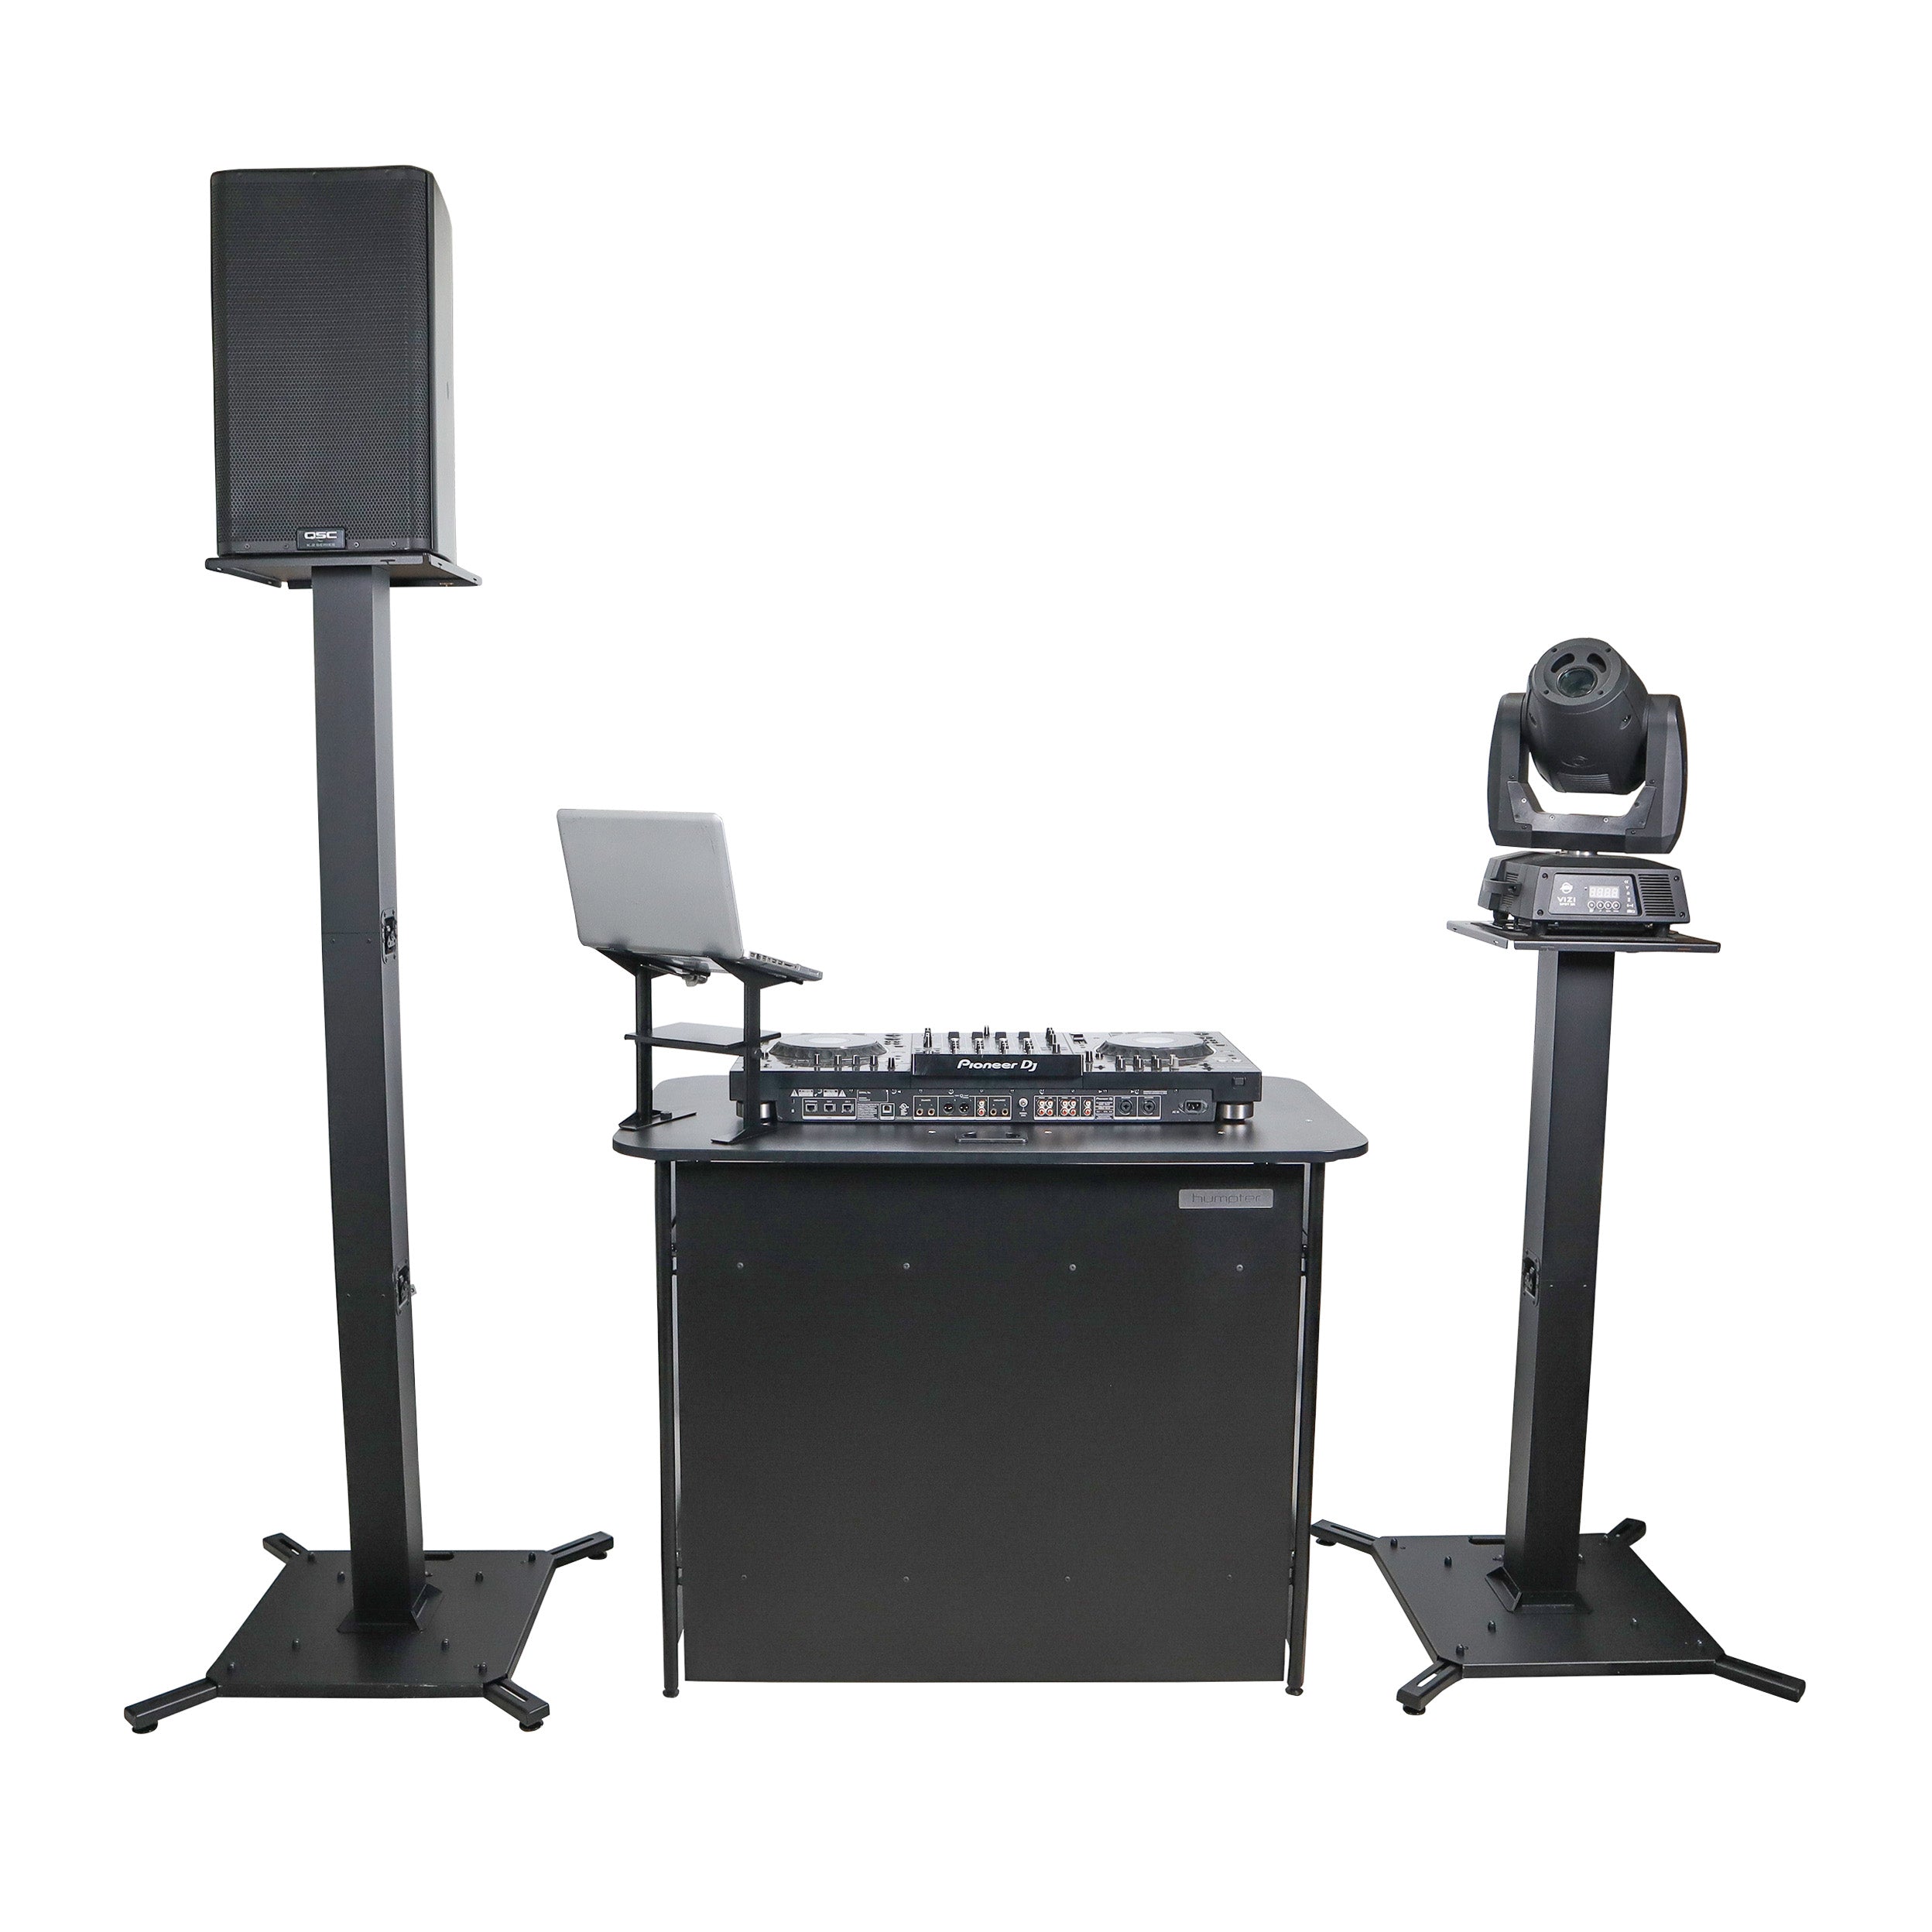 Pro X Pair of Moving Head or Lighting Speaker Totem DJ Stand with Carrying Bags by Humpter XFH-MHSTANDX2BL